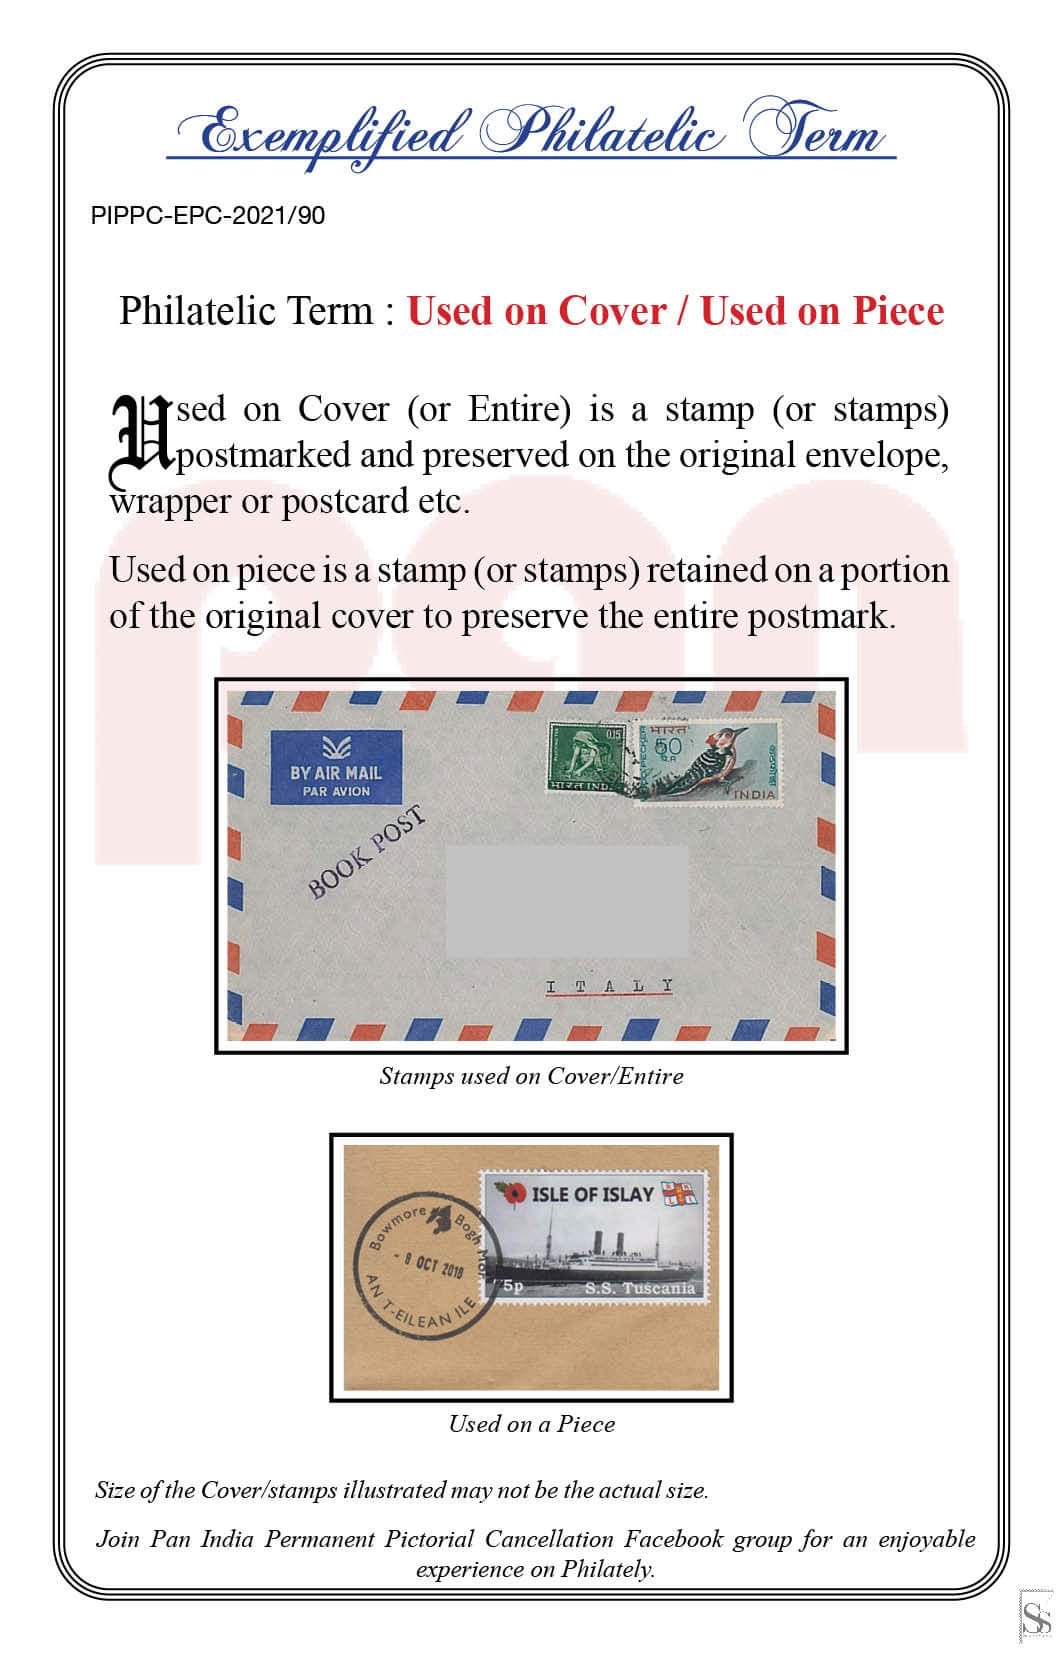 90.Today's exemplified philatelic term-Used on Cover/Used on Piece